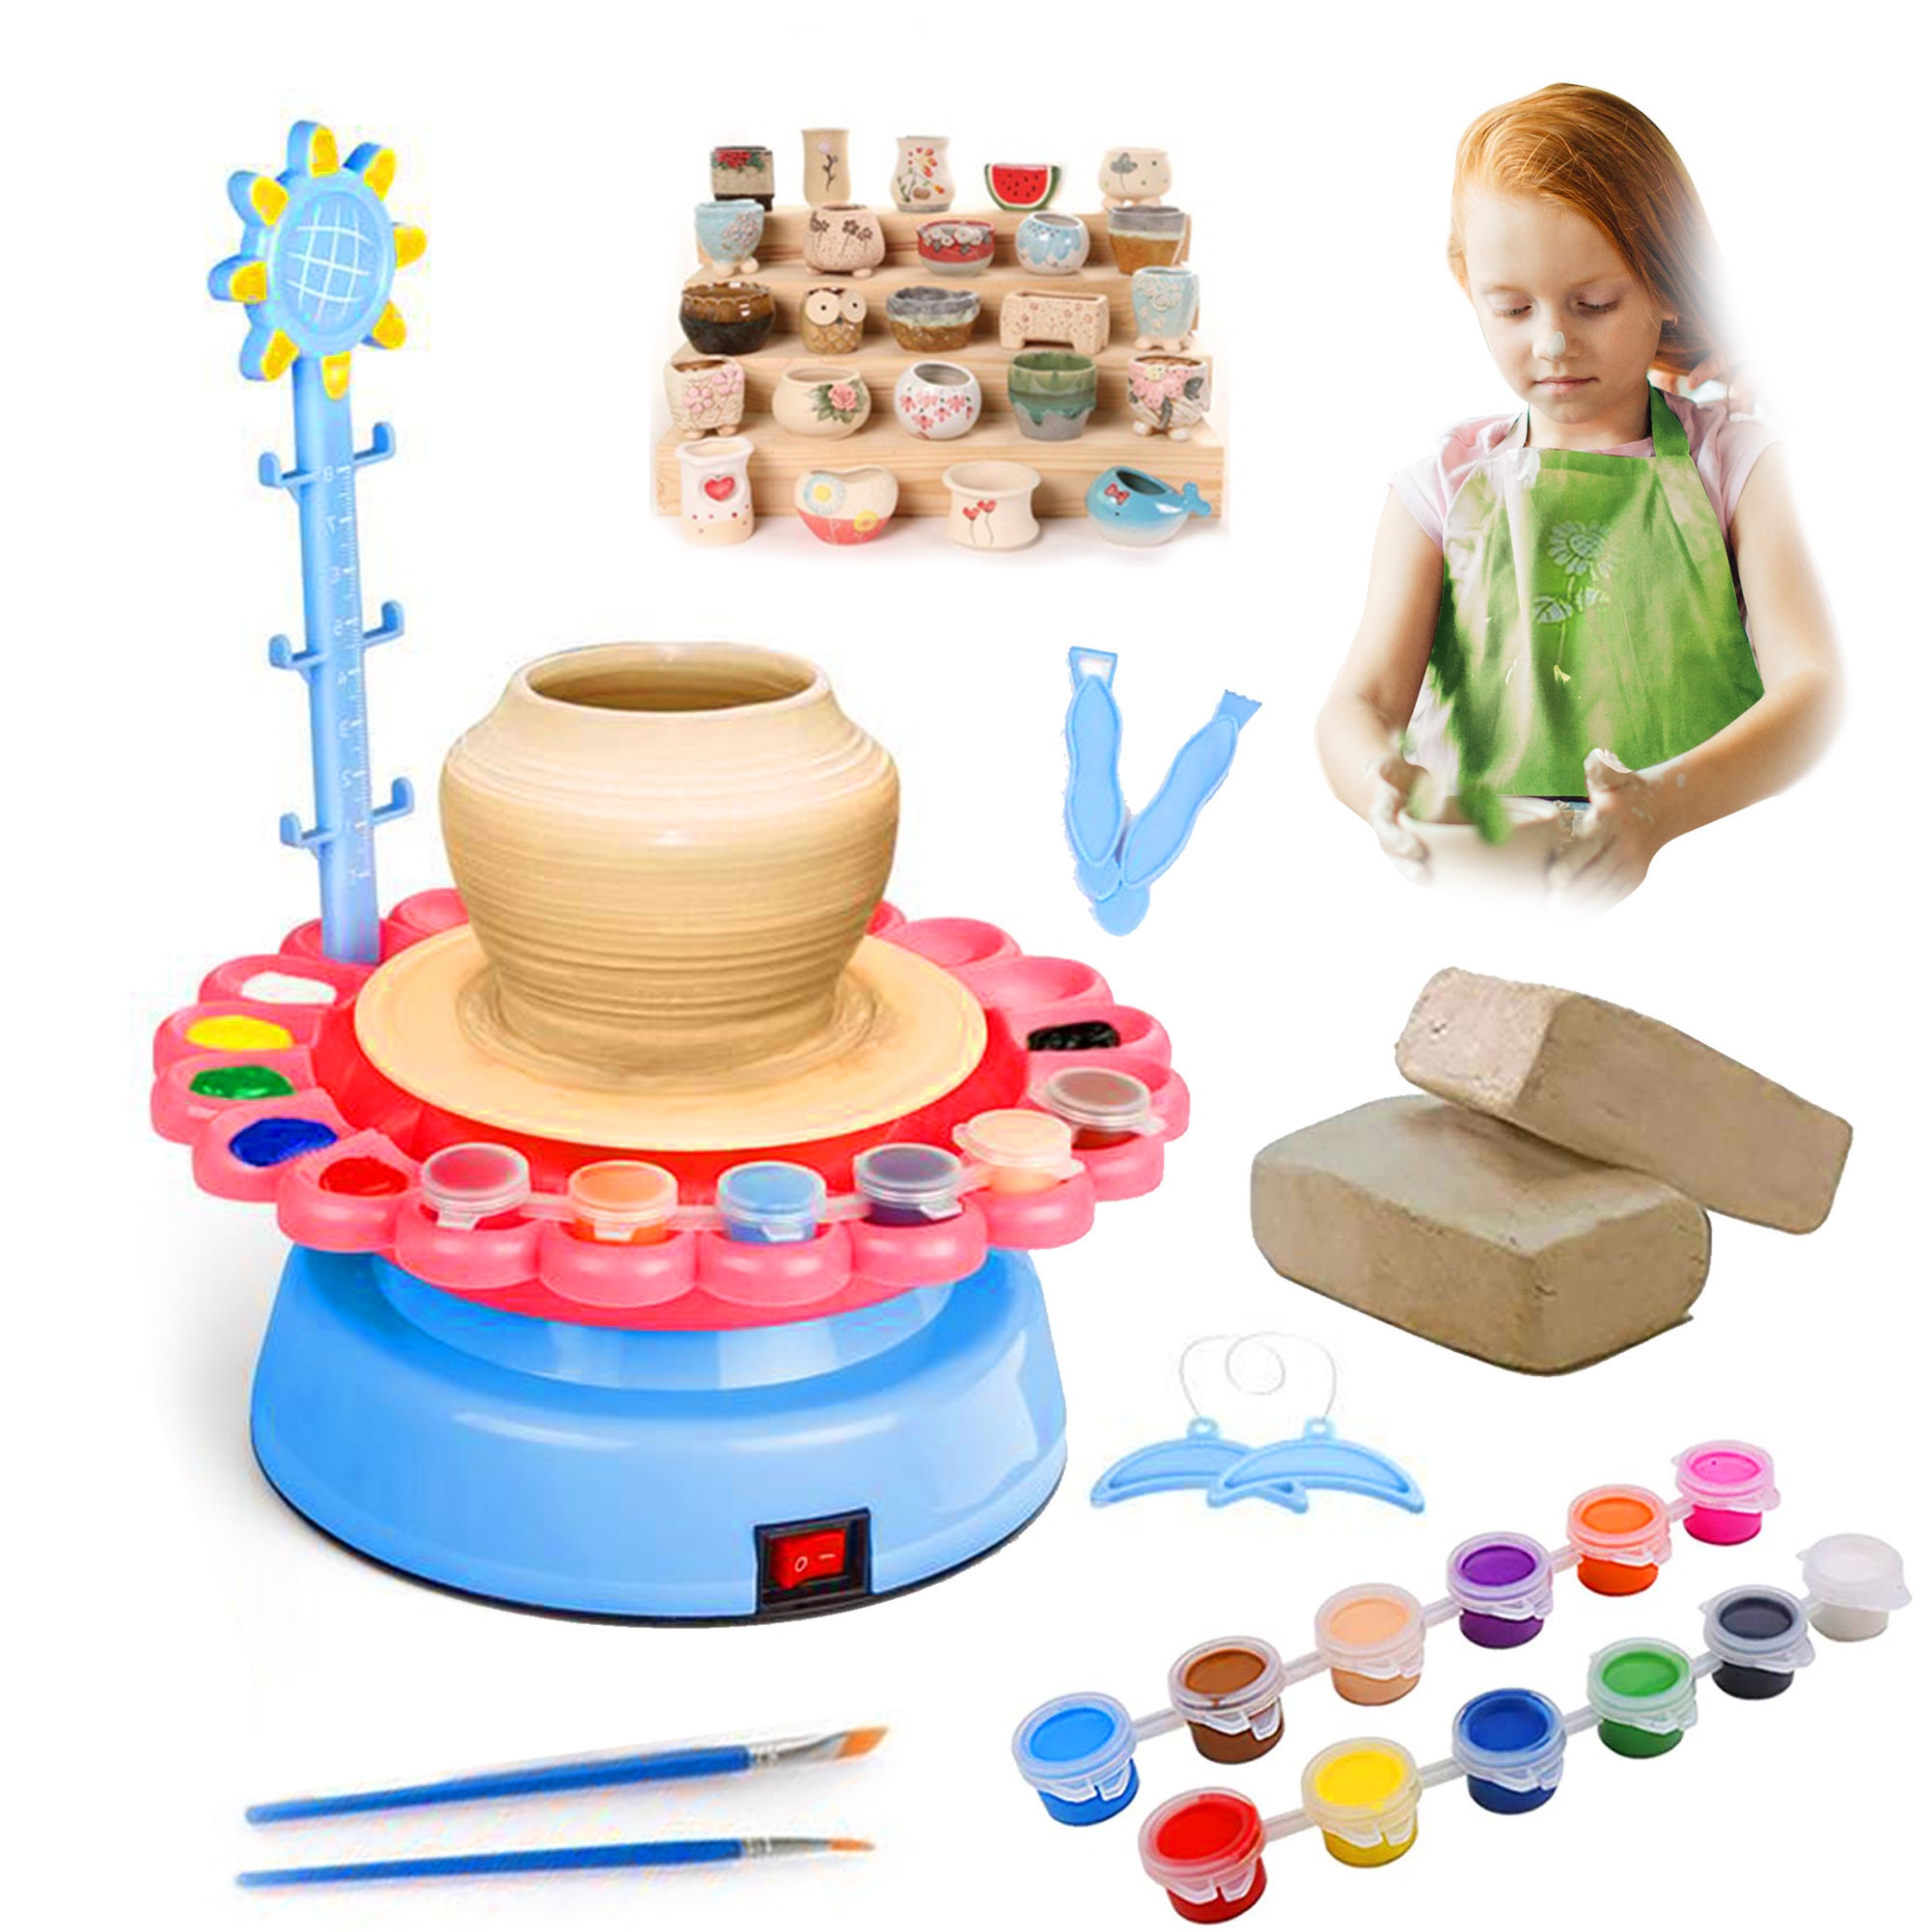 Buddynbuddies-2021 Newest Upgraded Pottery Studio USB Charger, Clay Pottery  Wheel Craft Kit for Kids Age 8 and Up, Air Dry Sculpting Clay 